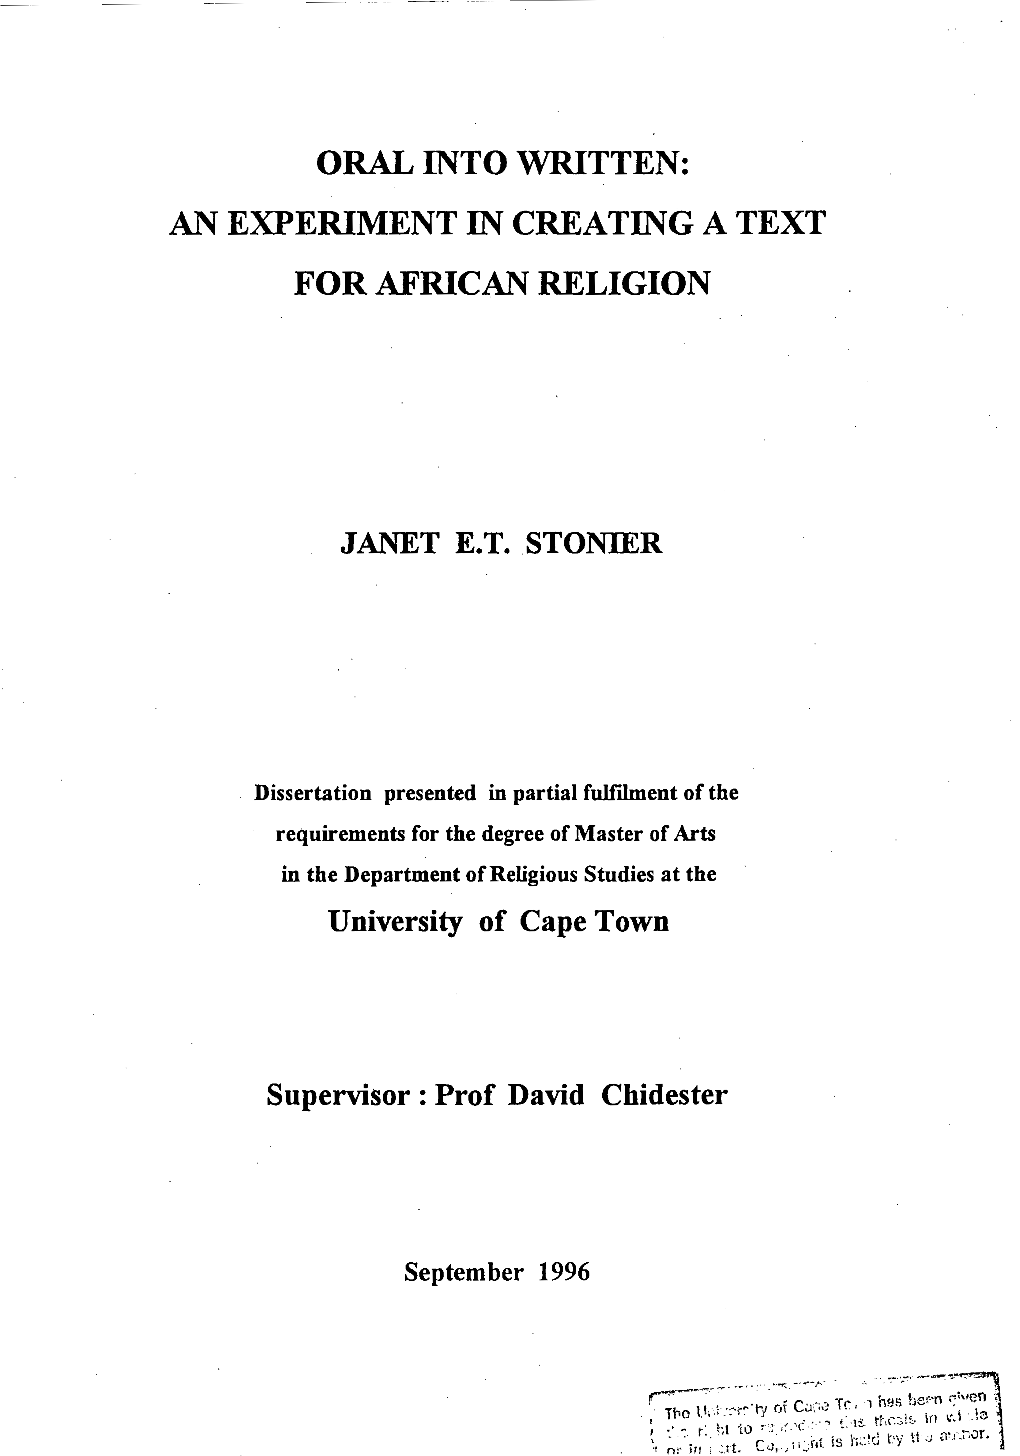 Oral Into Written: an Experiment in Creating a Text for African Religion